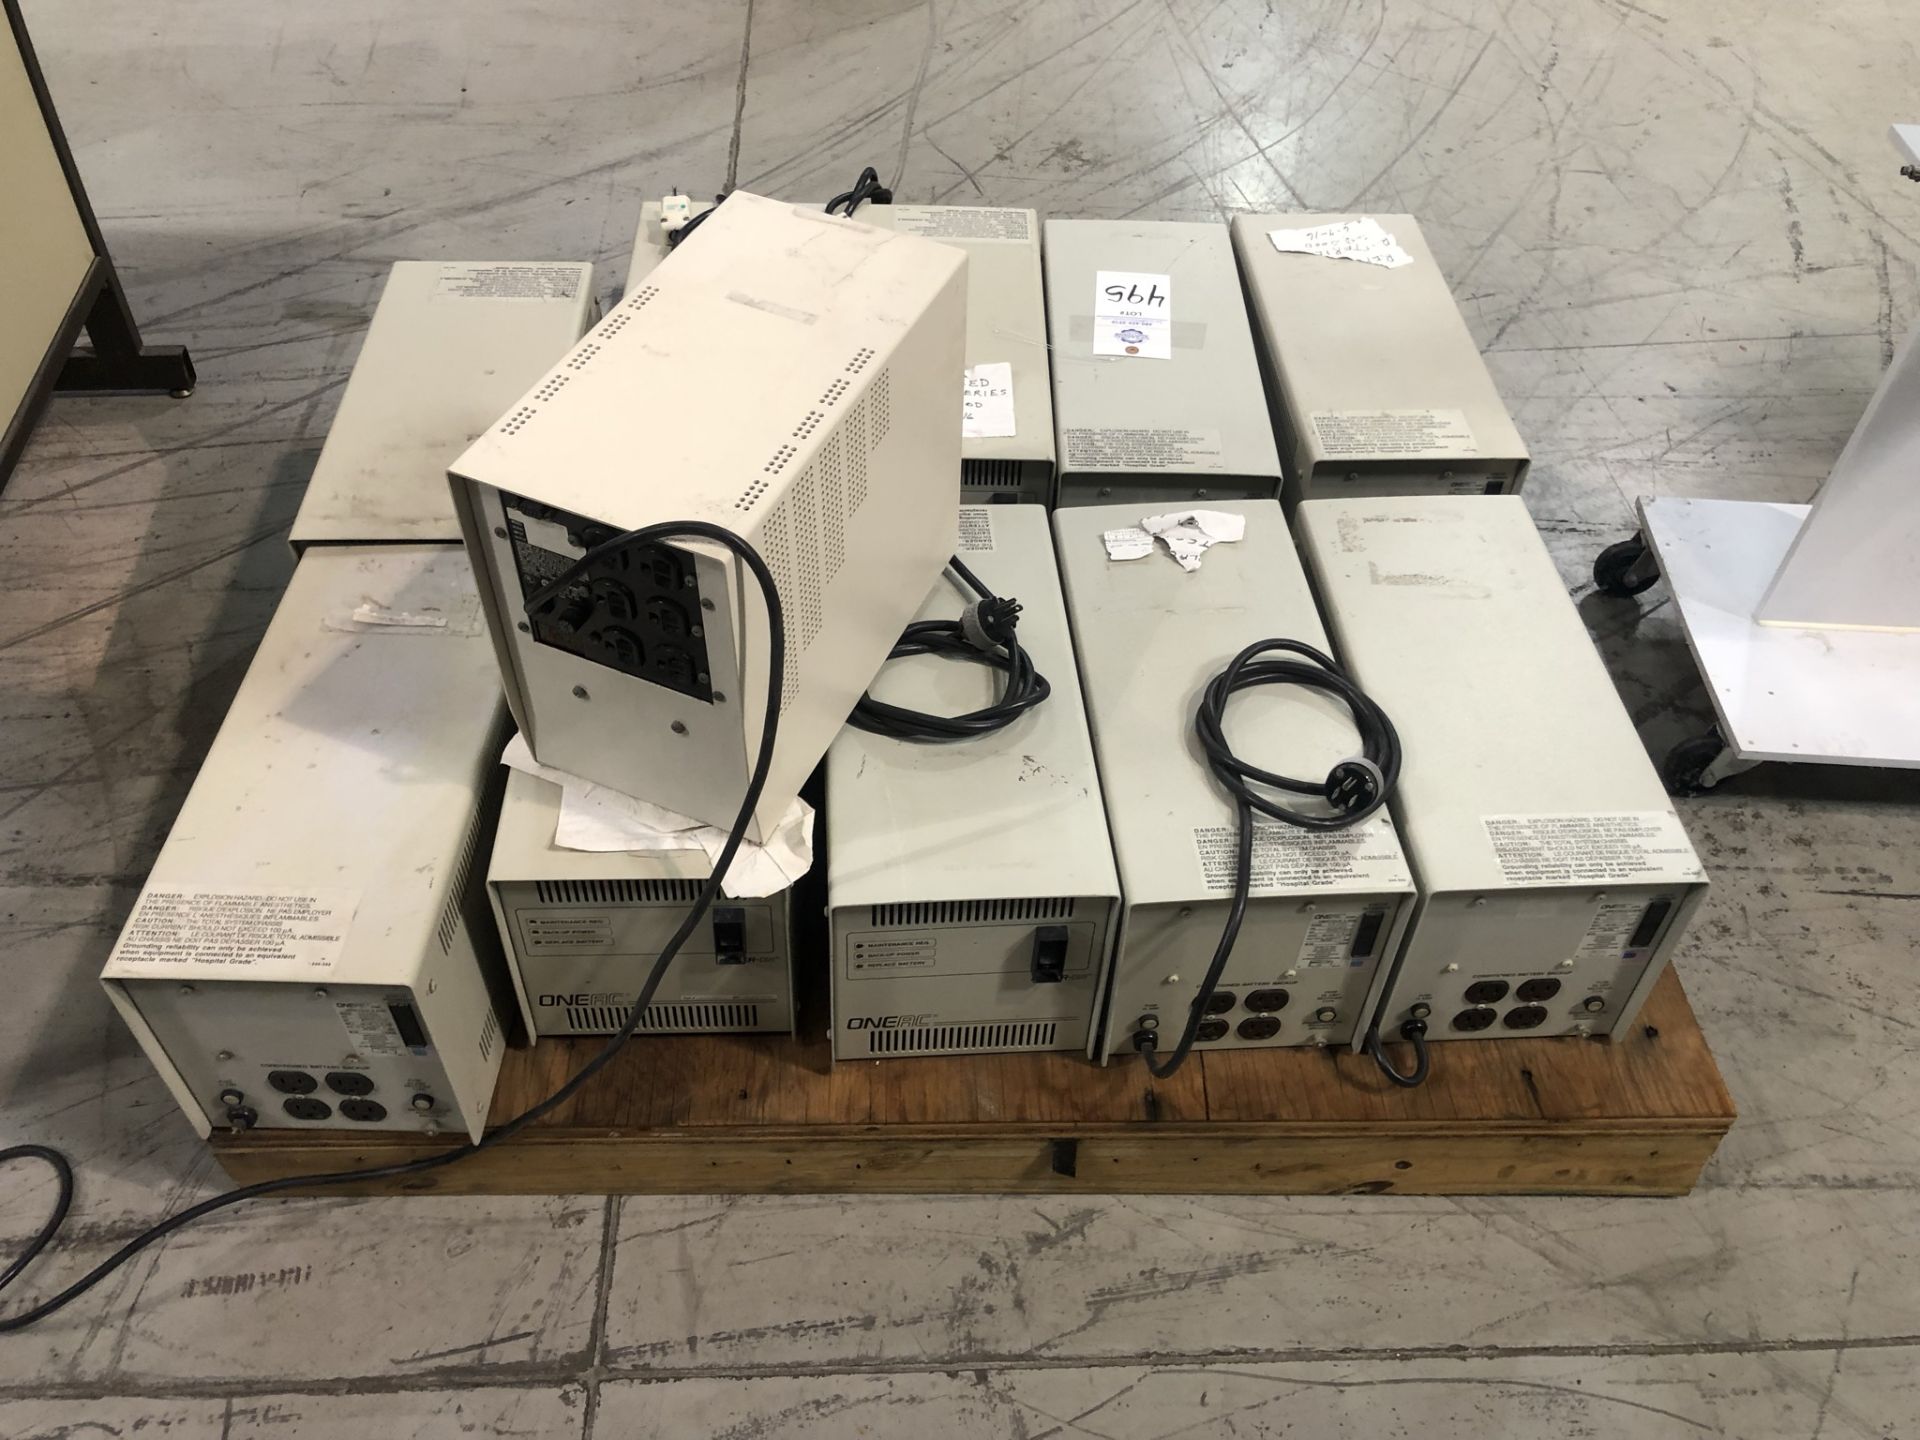 Oneac Corp., Quantity 10, Model UP1103, Uninterruptable Power Supplies (see detail PDF) - Image 9 of 11